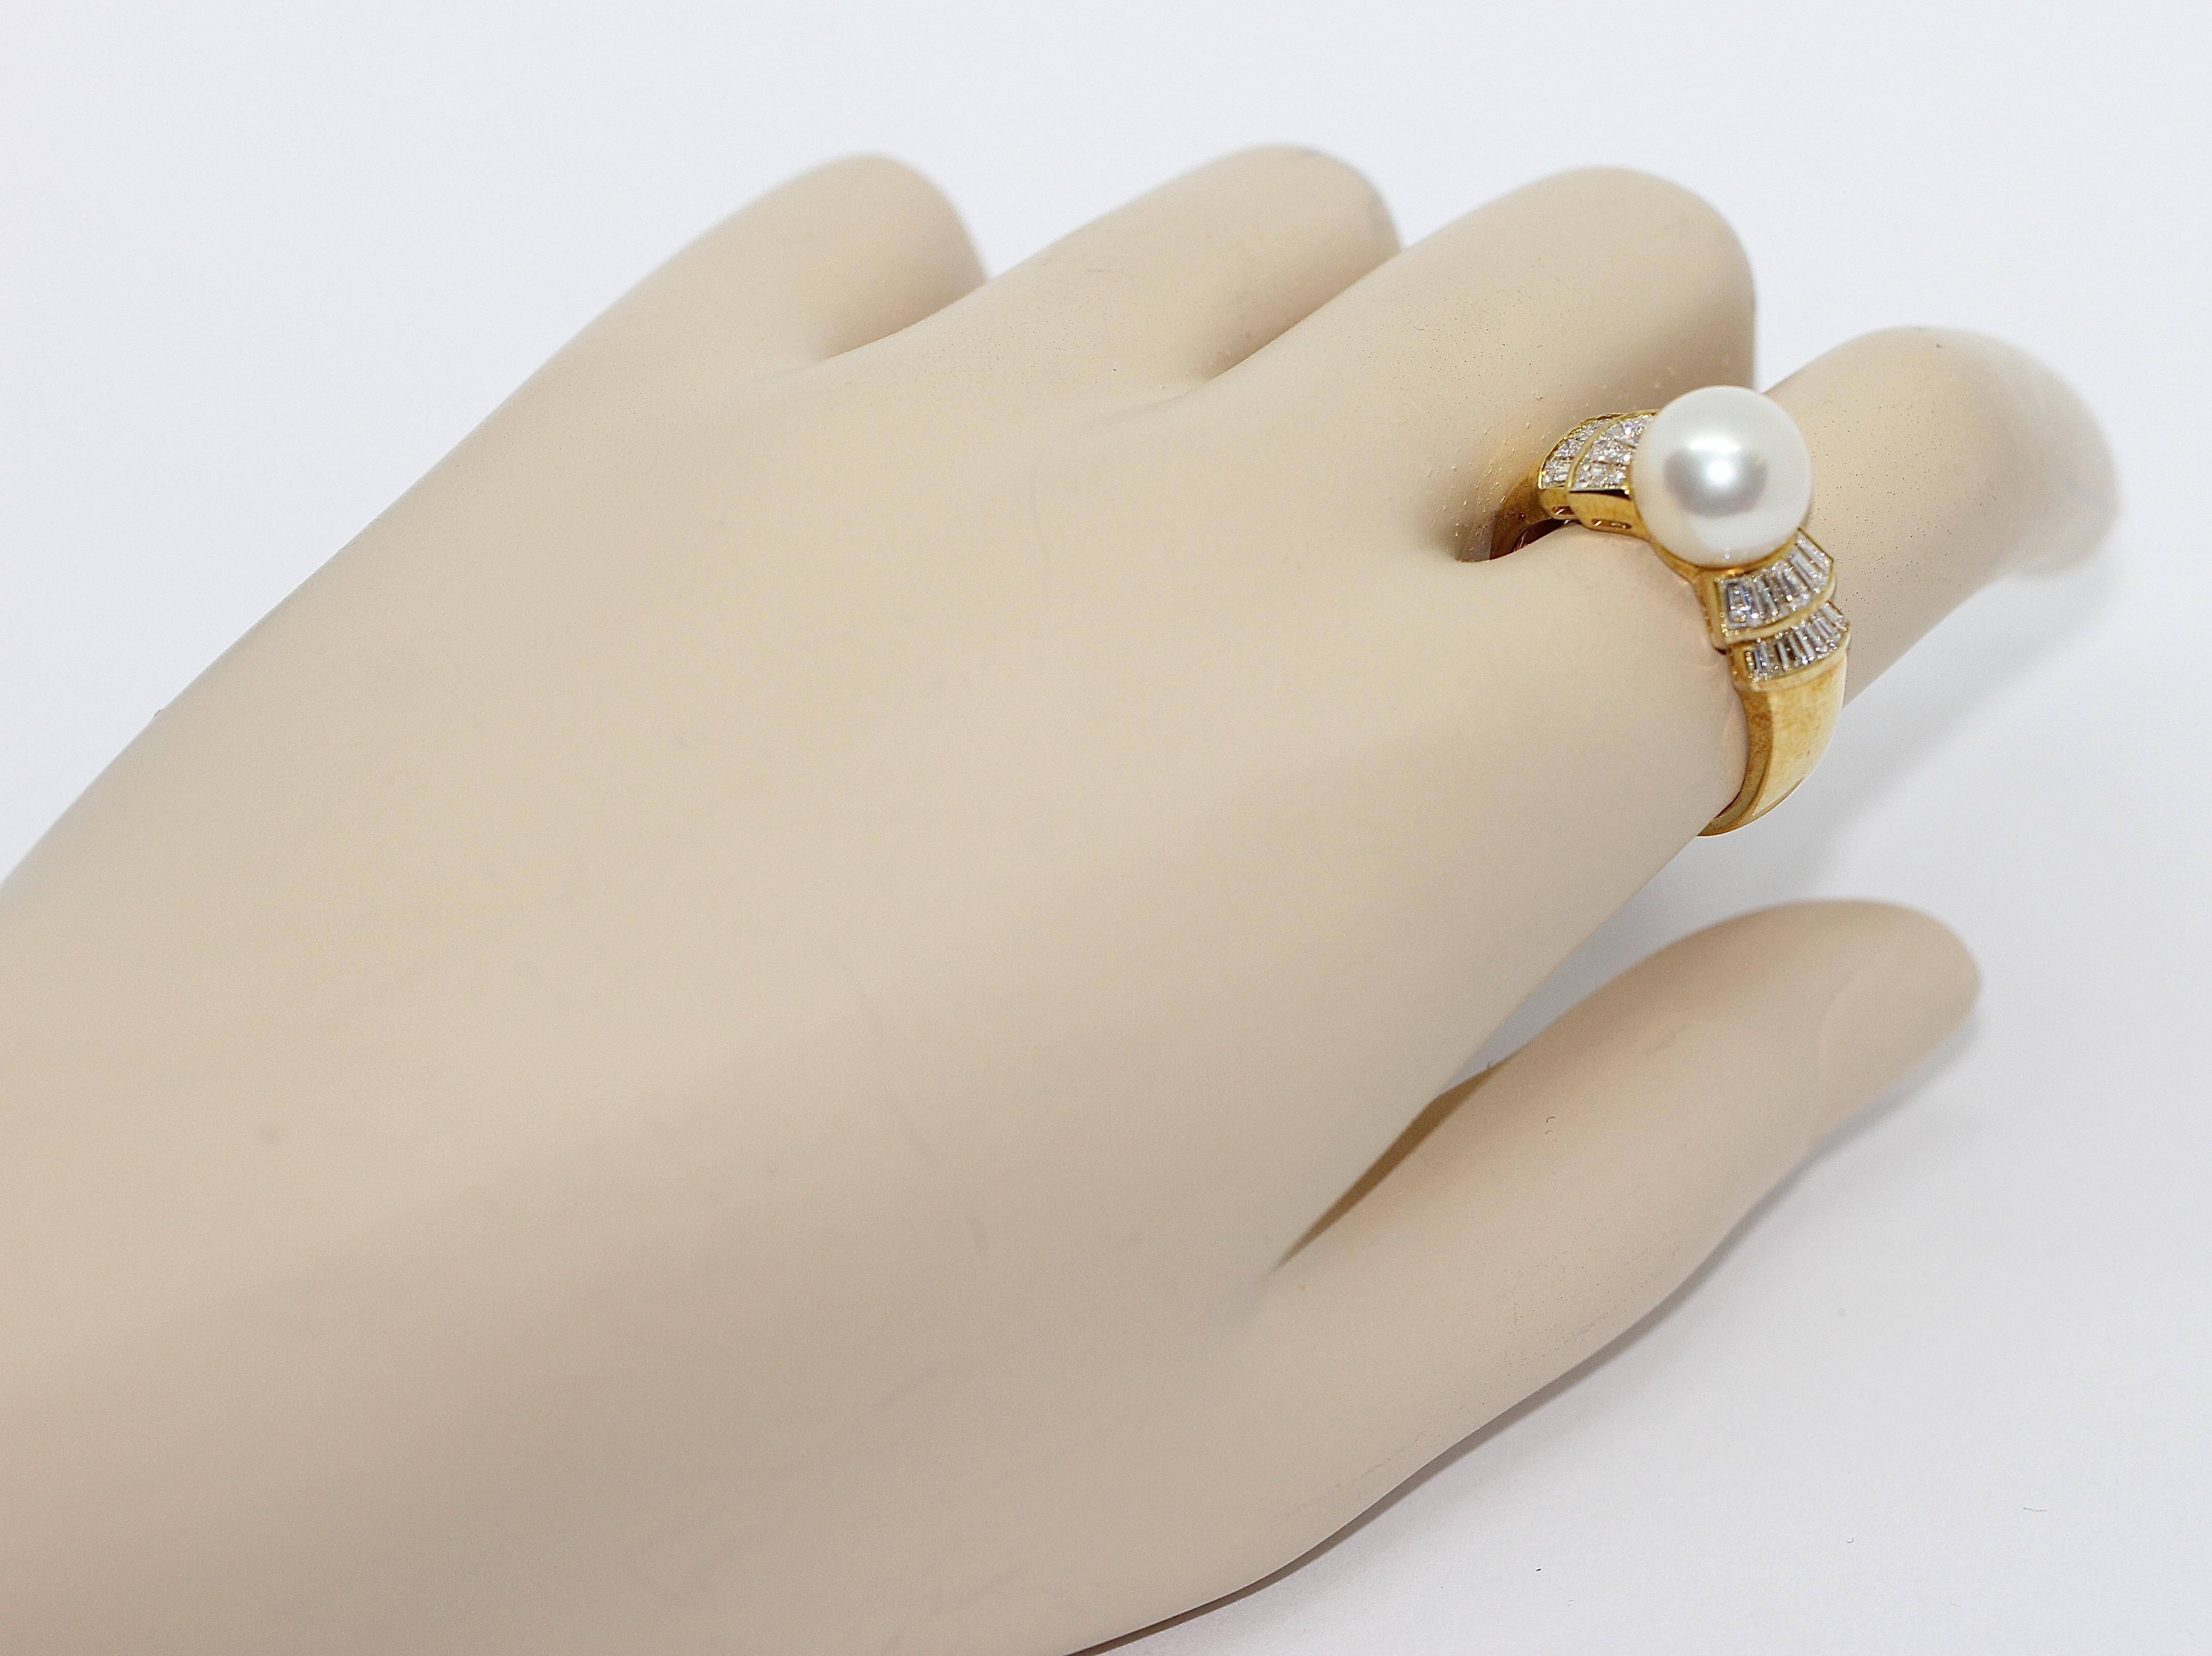 18 Karat Ladies Gold Ring Set with 20 Diamonds and Pearl, by Wempe In Good Condition For Sale In Berlin, DE